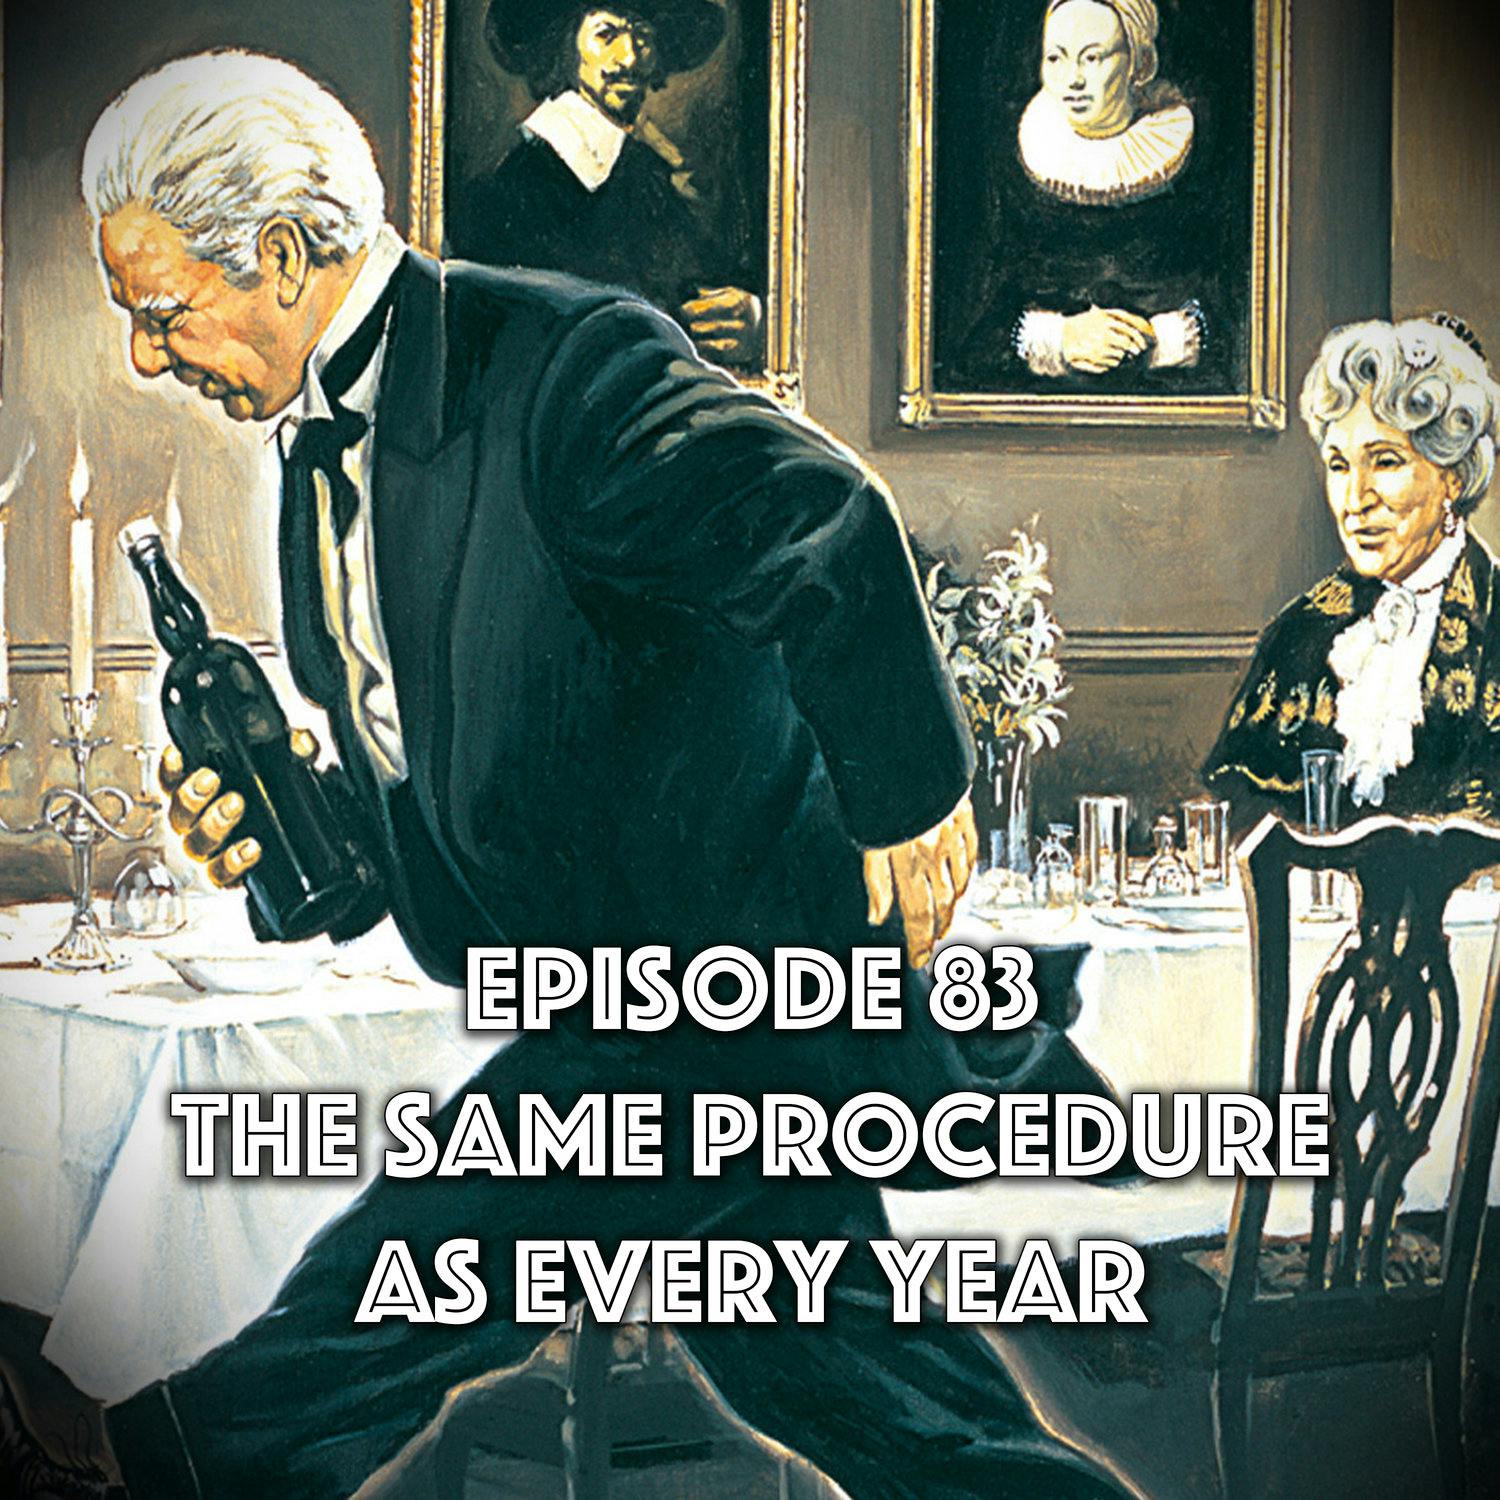 Episode 83: The Same Procedure As Every Year